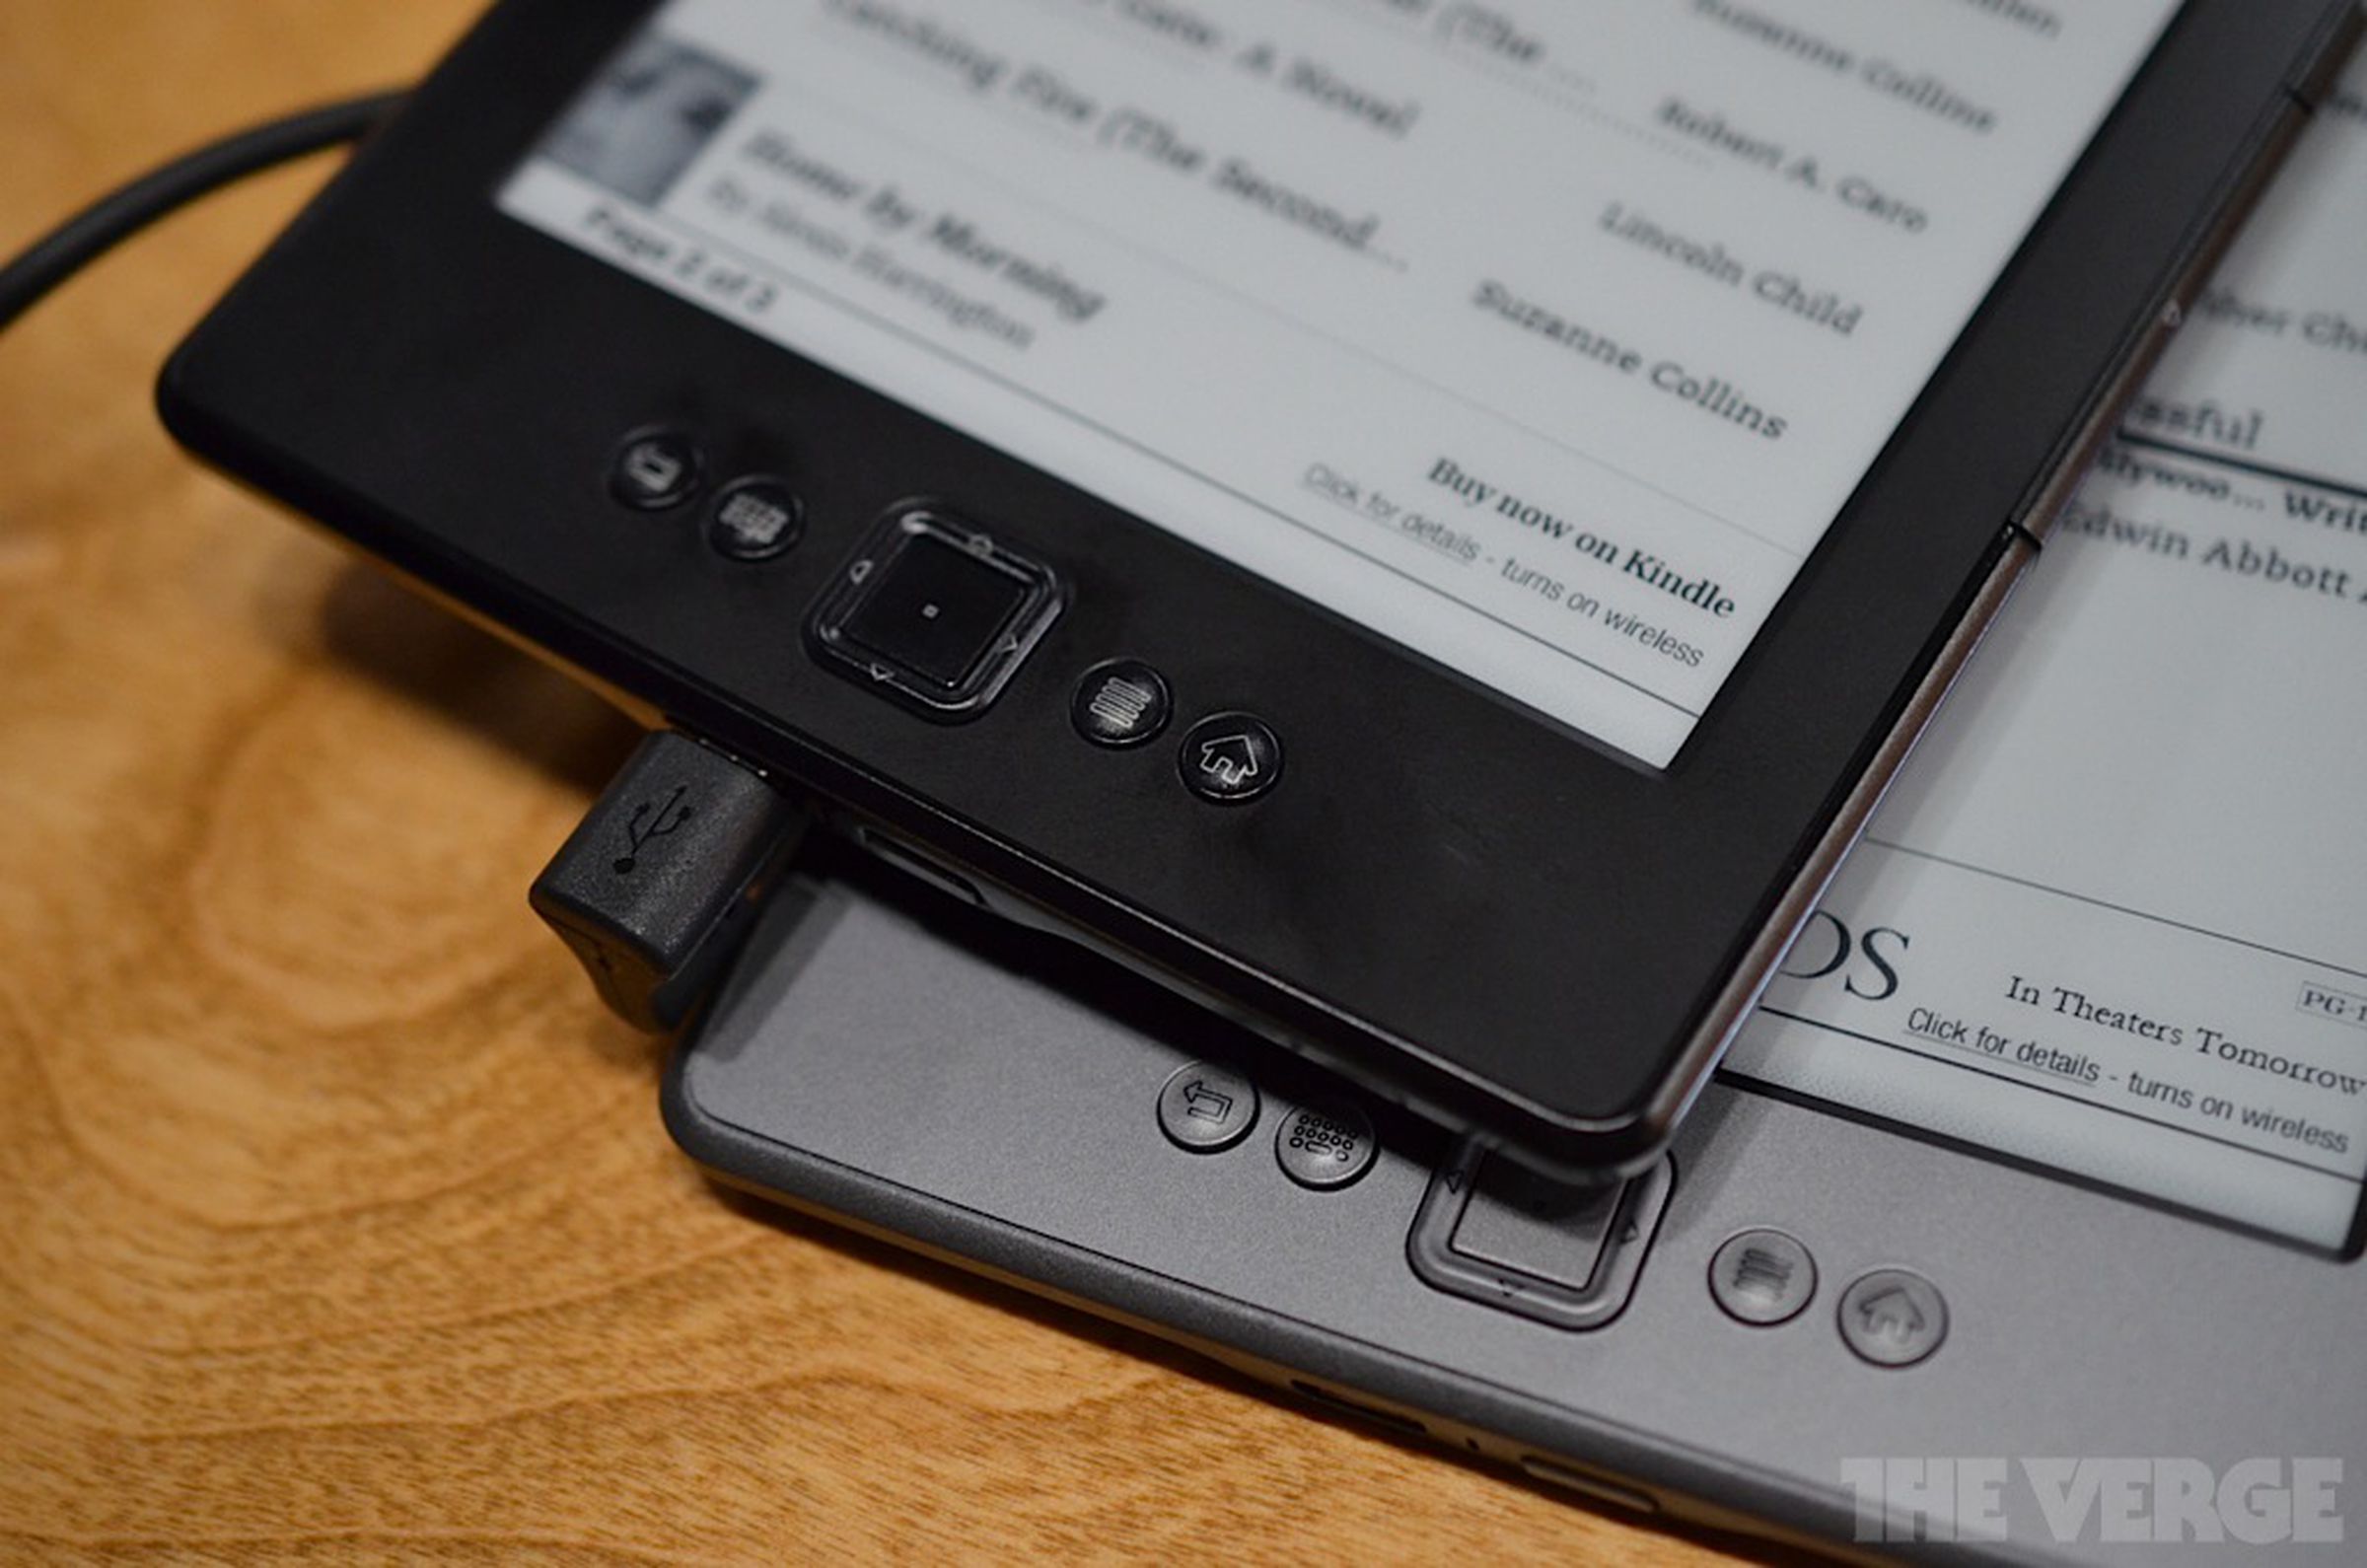 Amazon's $69 Kindle hands-on pictures